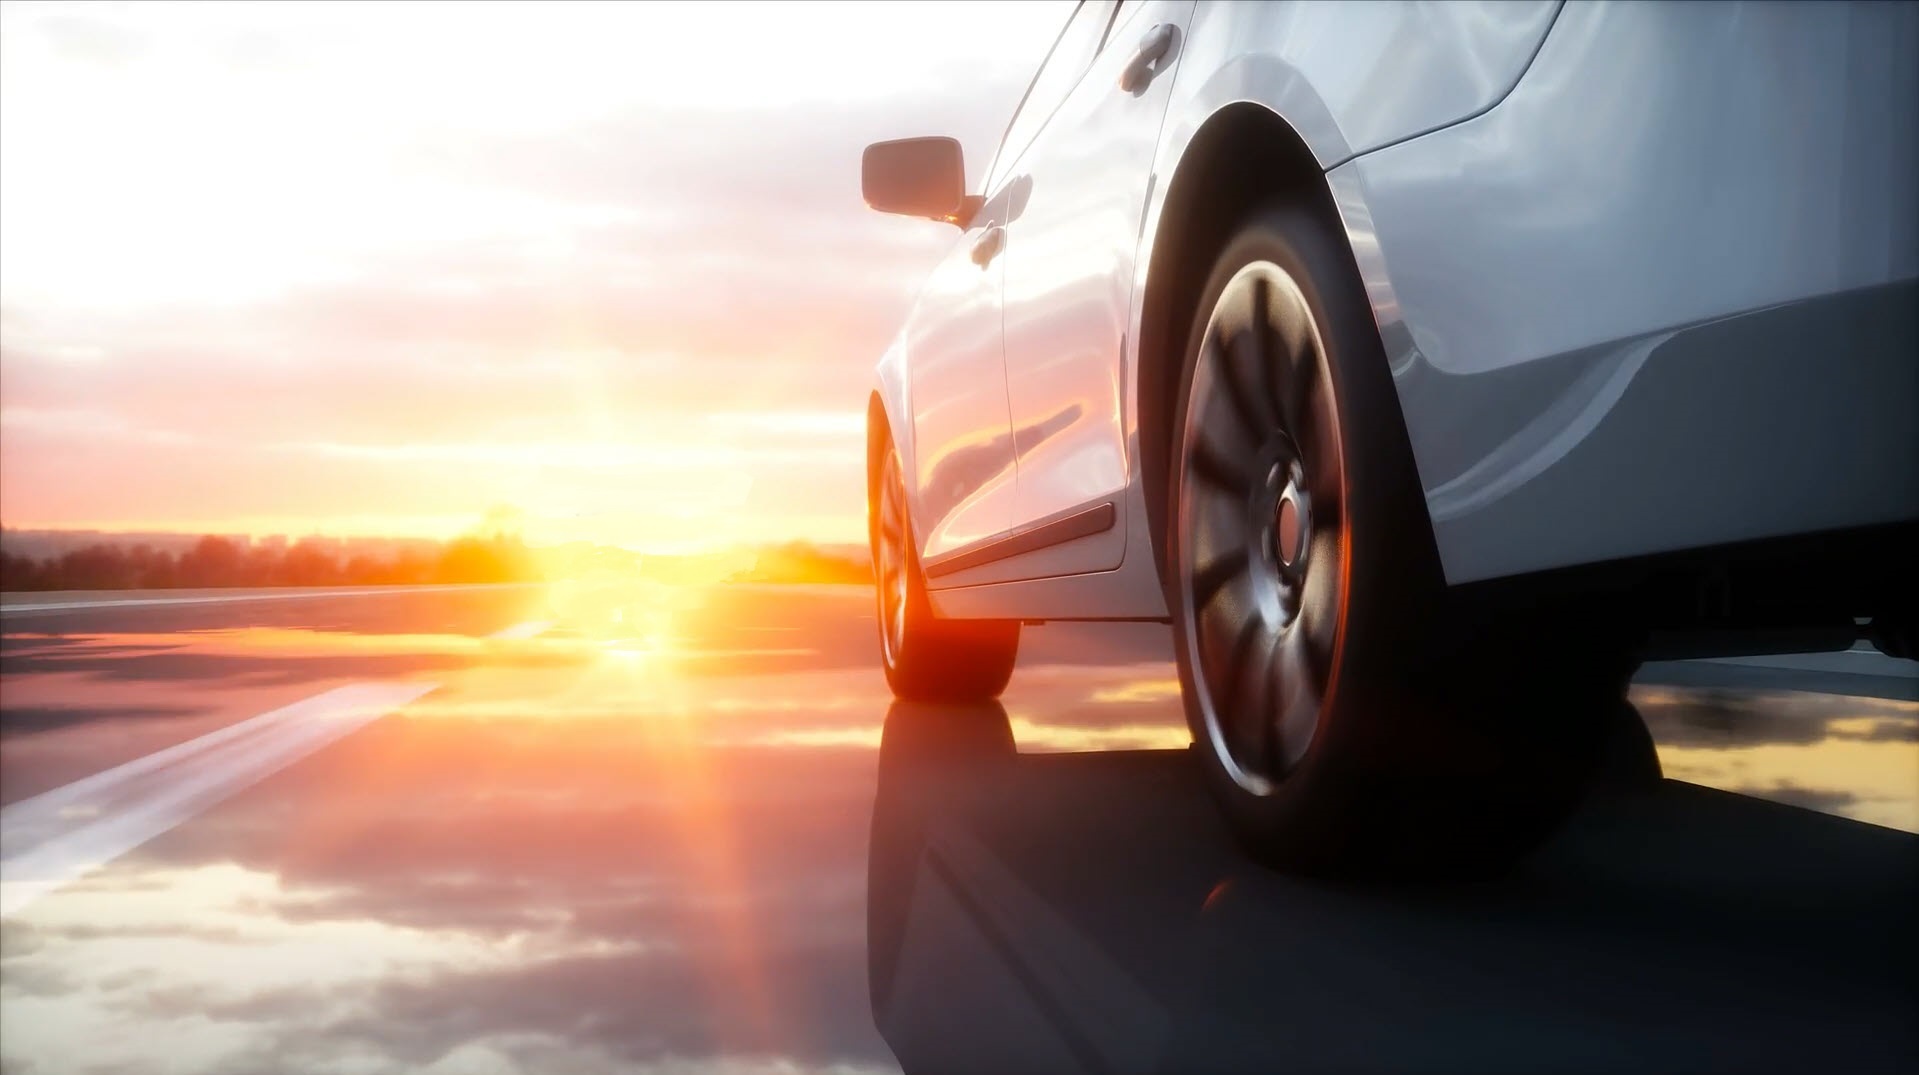 an image of a car and the sun to illustrate embedded automotive design